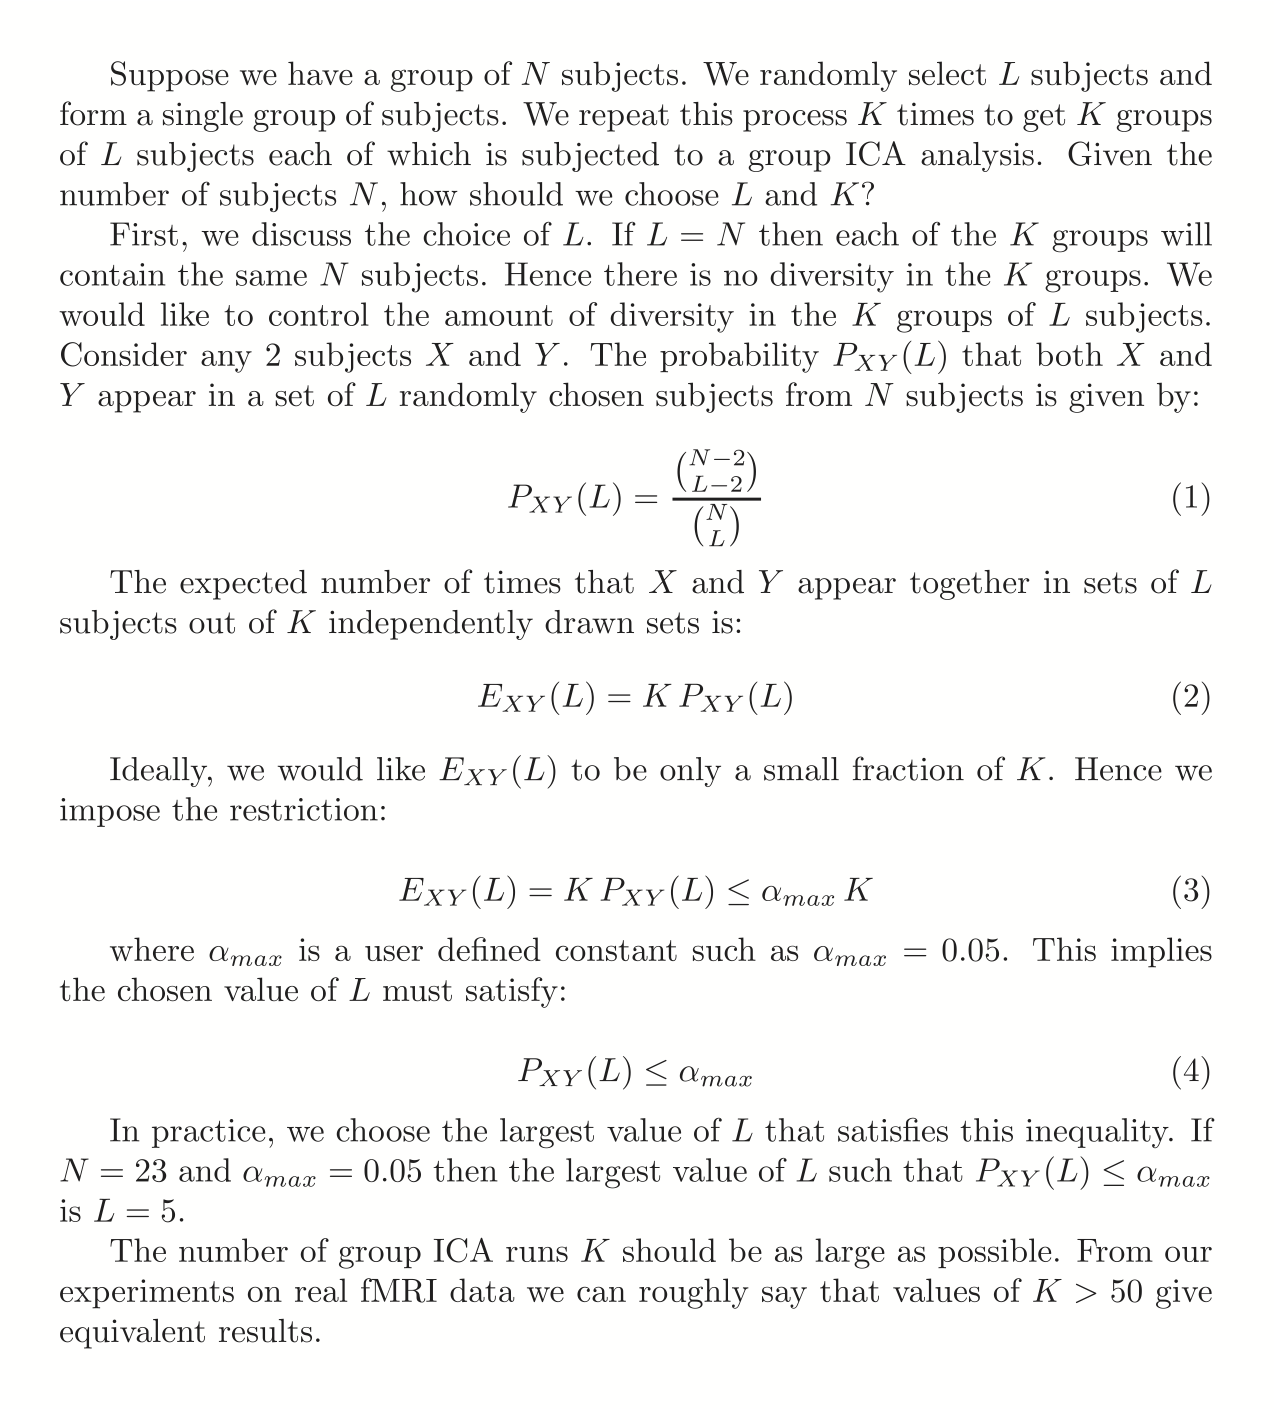 Logic for choosing L and K given N